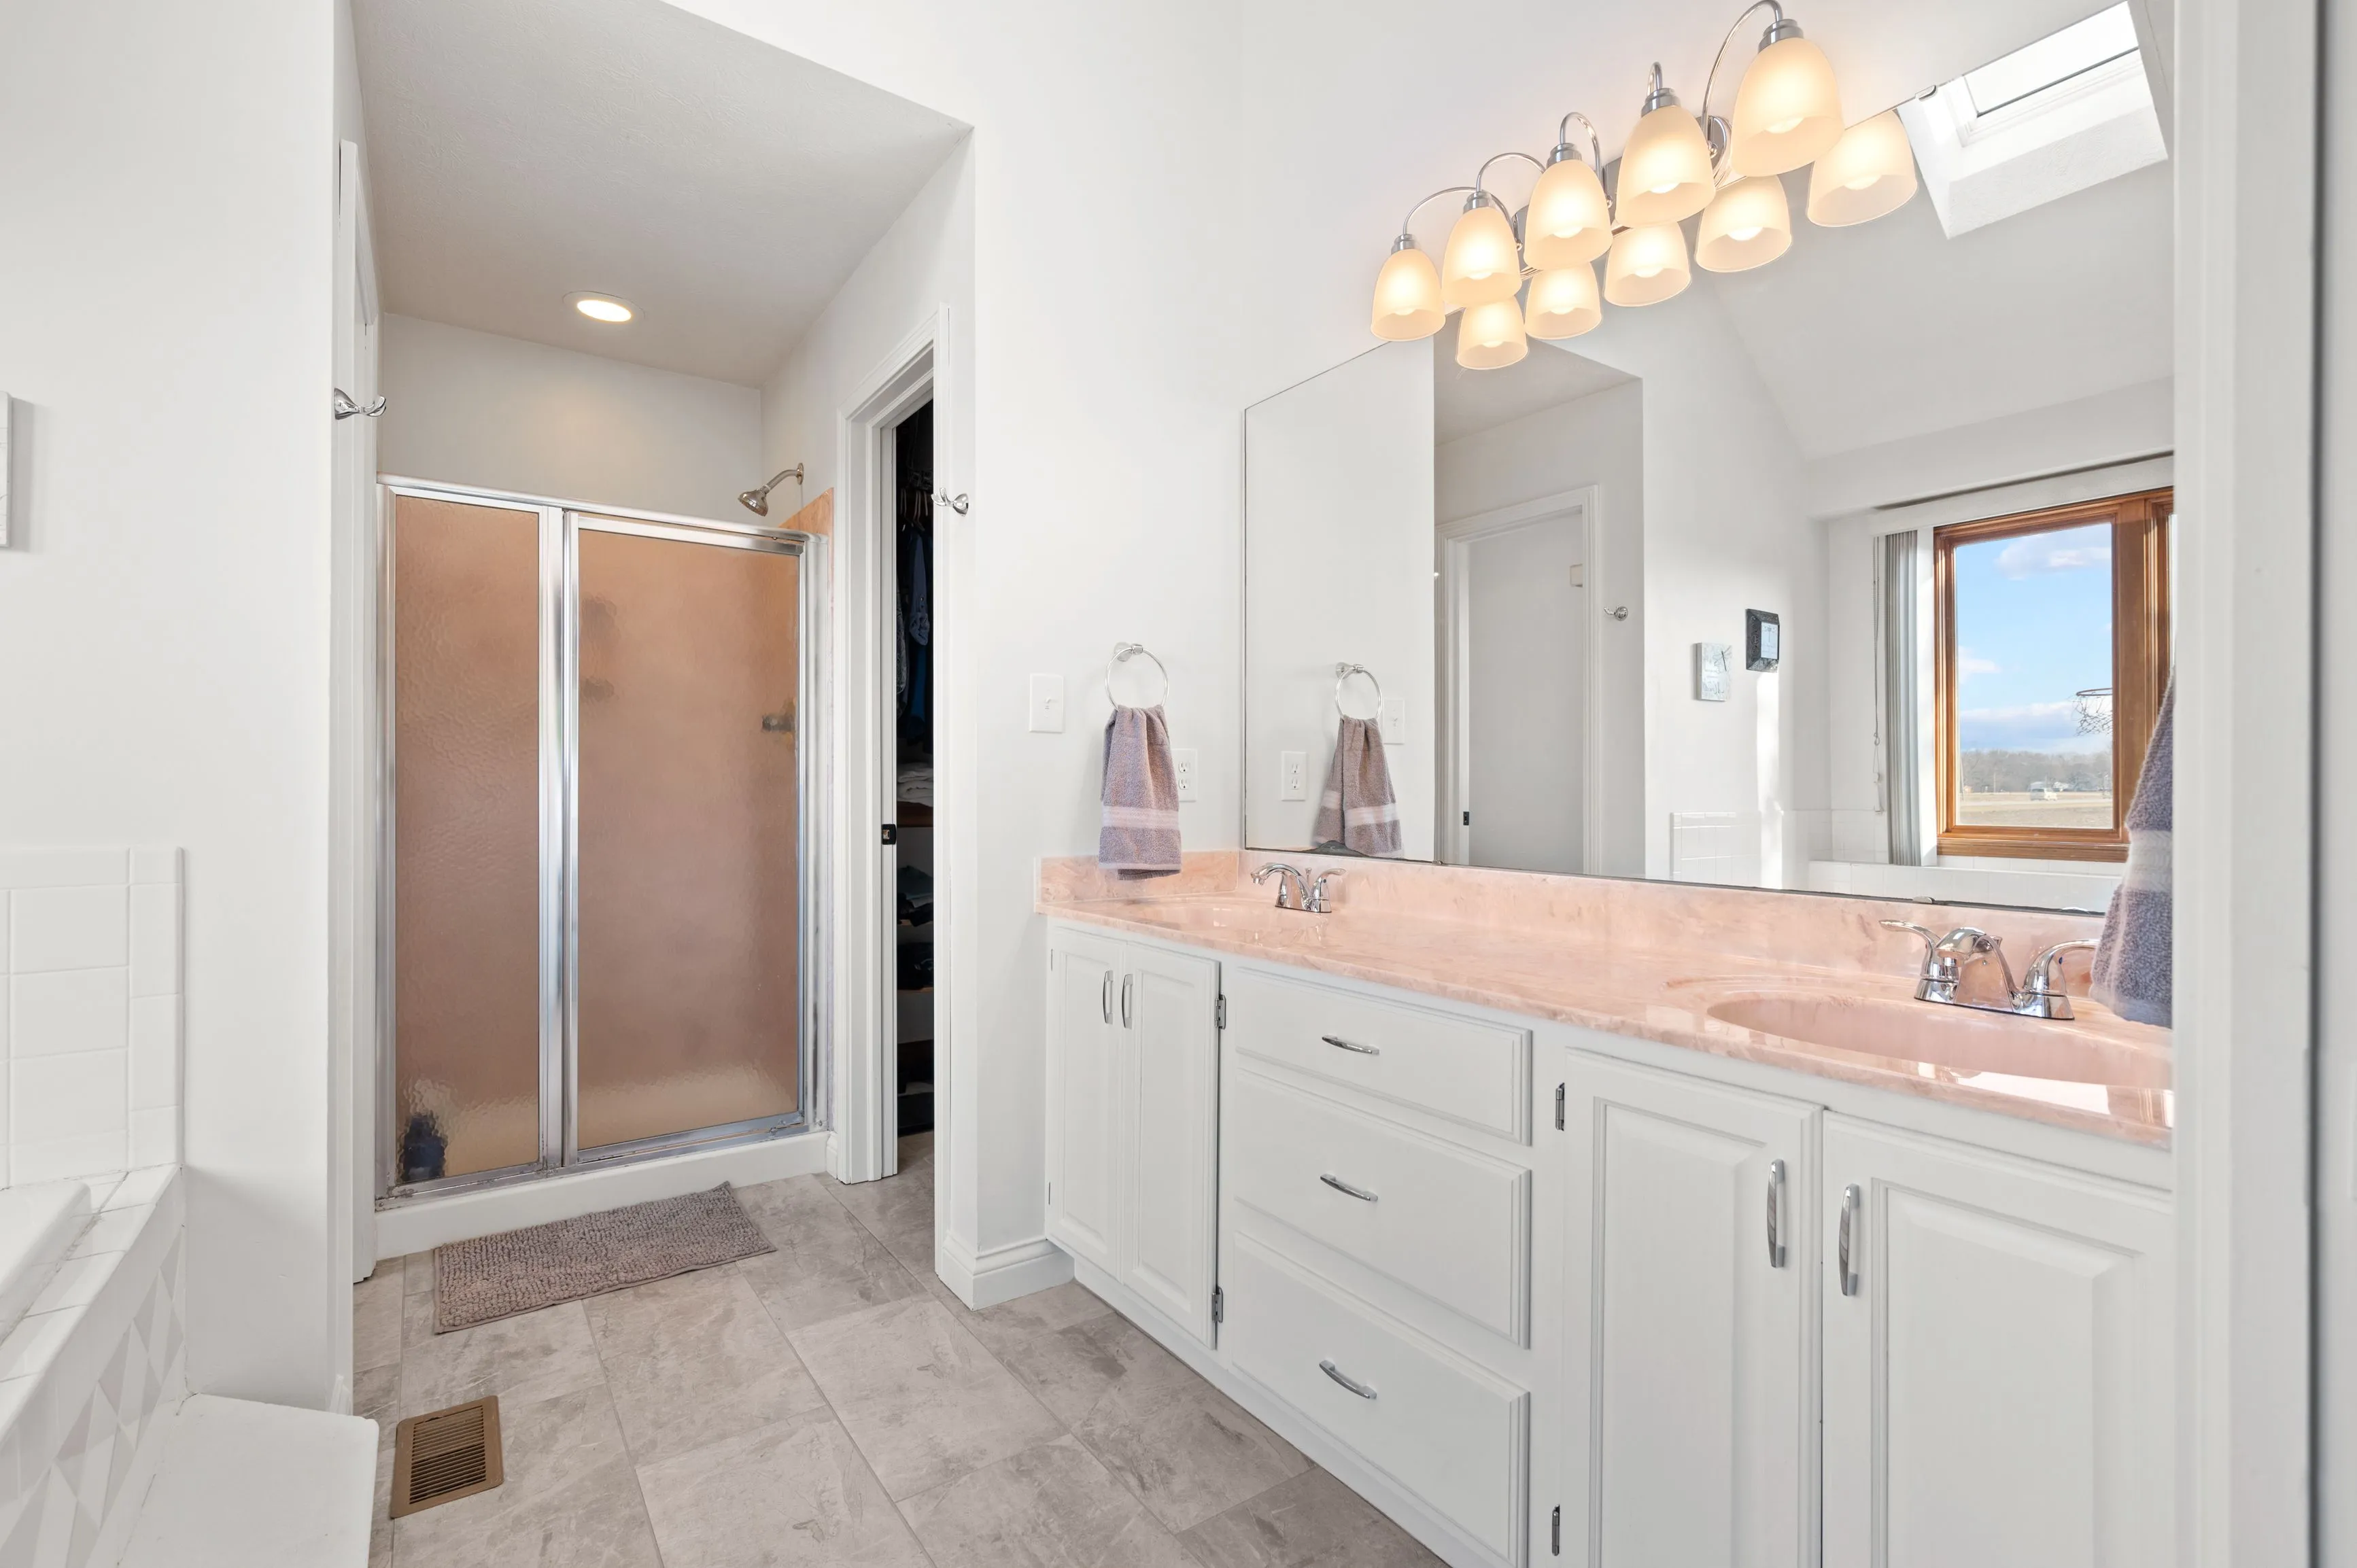 Bright modern bathroom with a double vanity, large mirror, frosted glass shower, and tiled flooring.